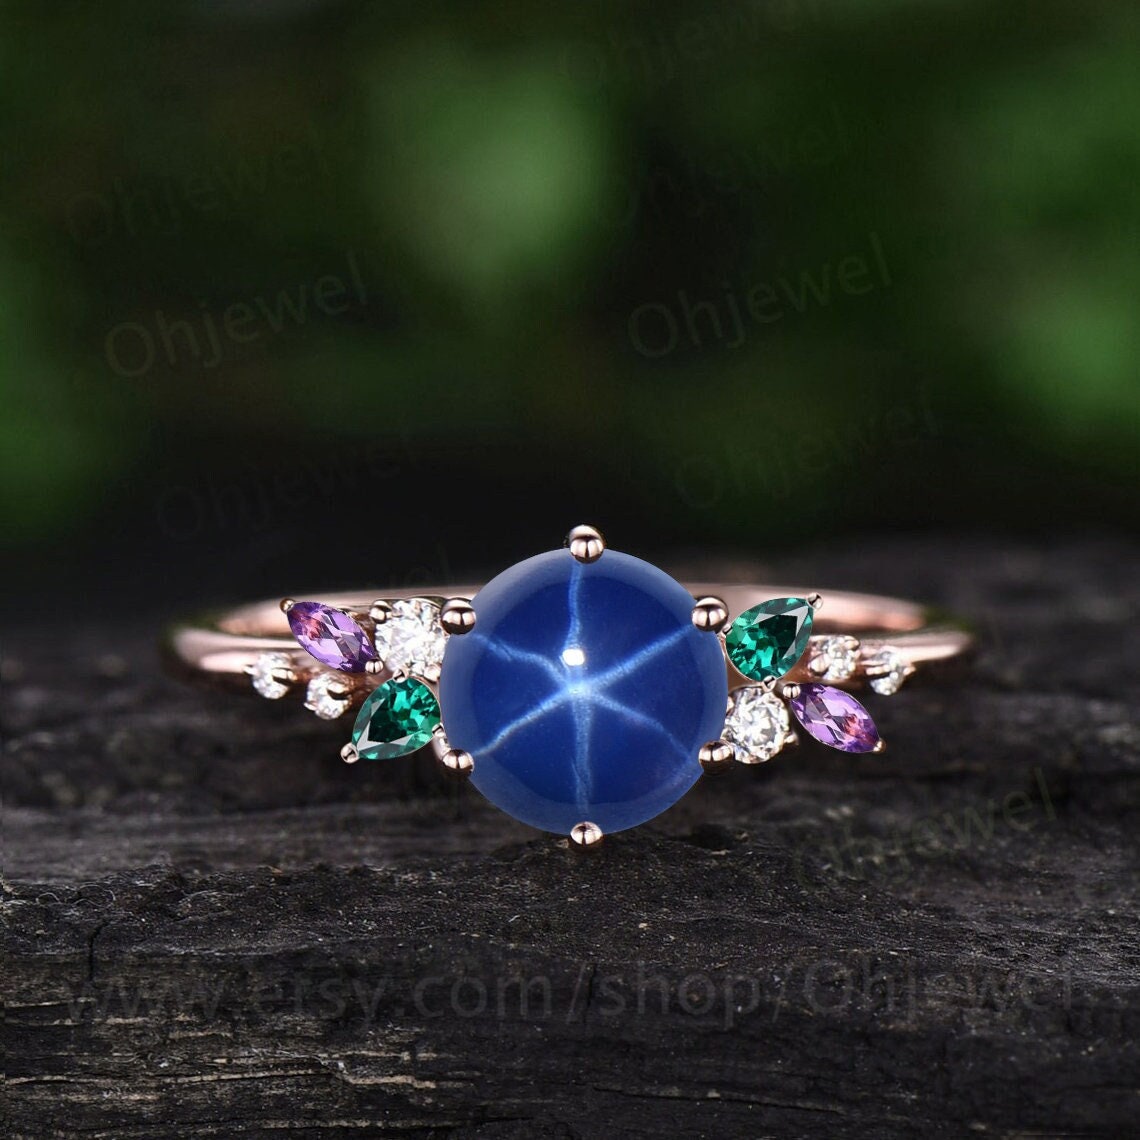 Round star sapphire ring vintage amethyst emerald ring rose gold unique cluster snowdrift engagement ring unique anniversary ring women gift